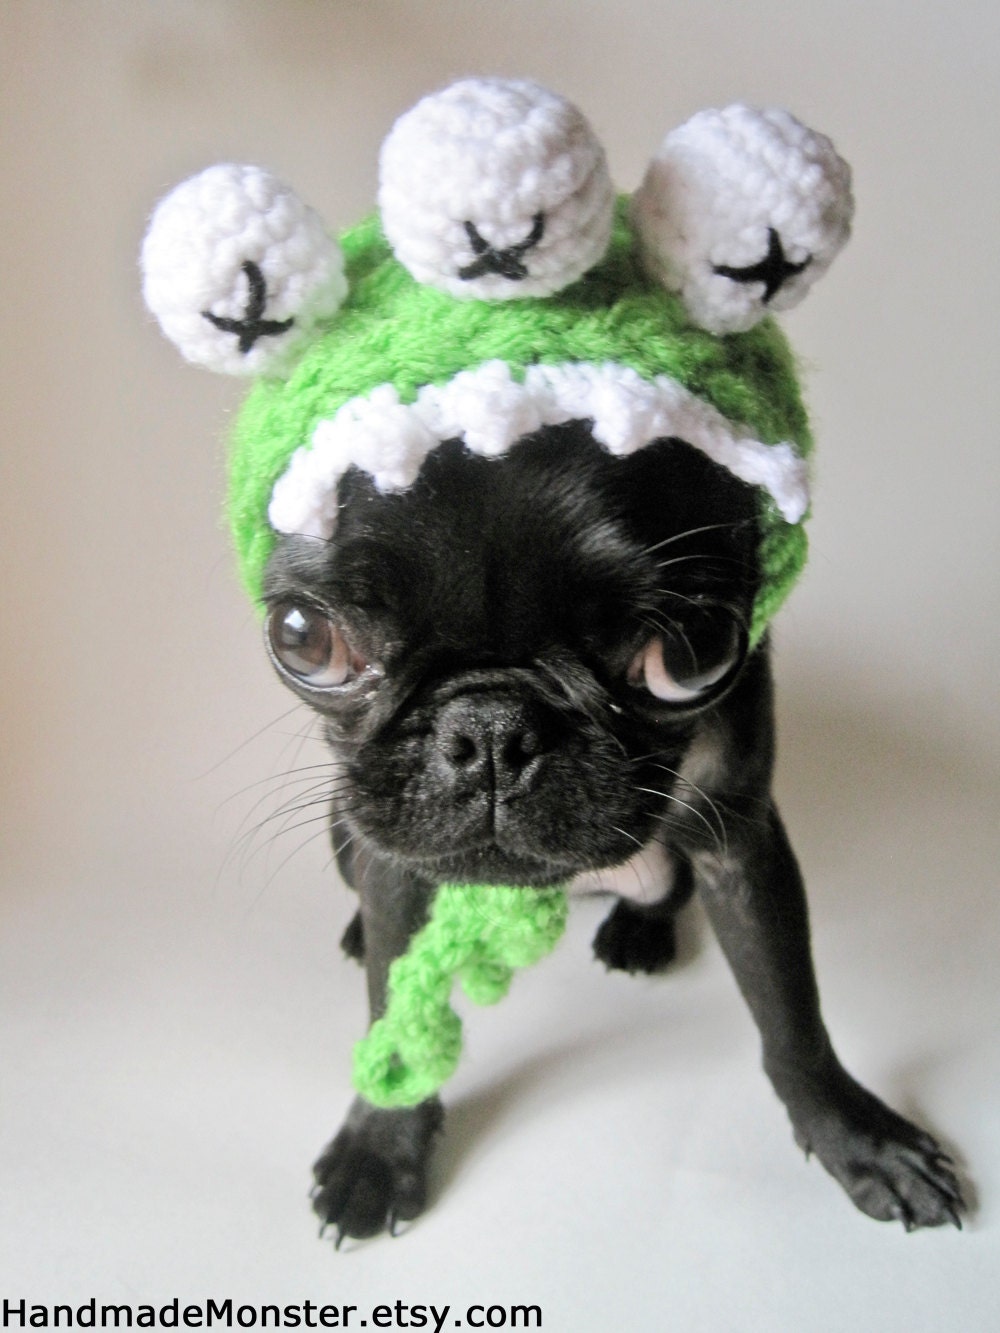 DOG COSTUME HALLOWEEN costumes monster crocheted hood hat for cat dog x-small small medium puppy hoodie adjustable crochet